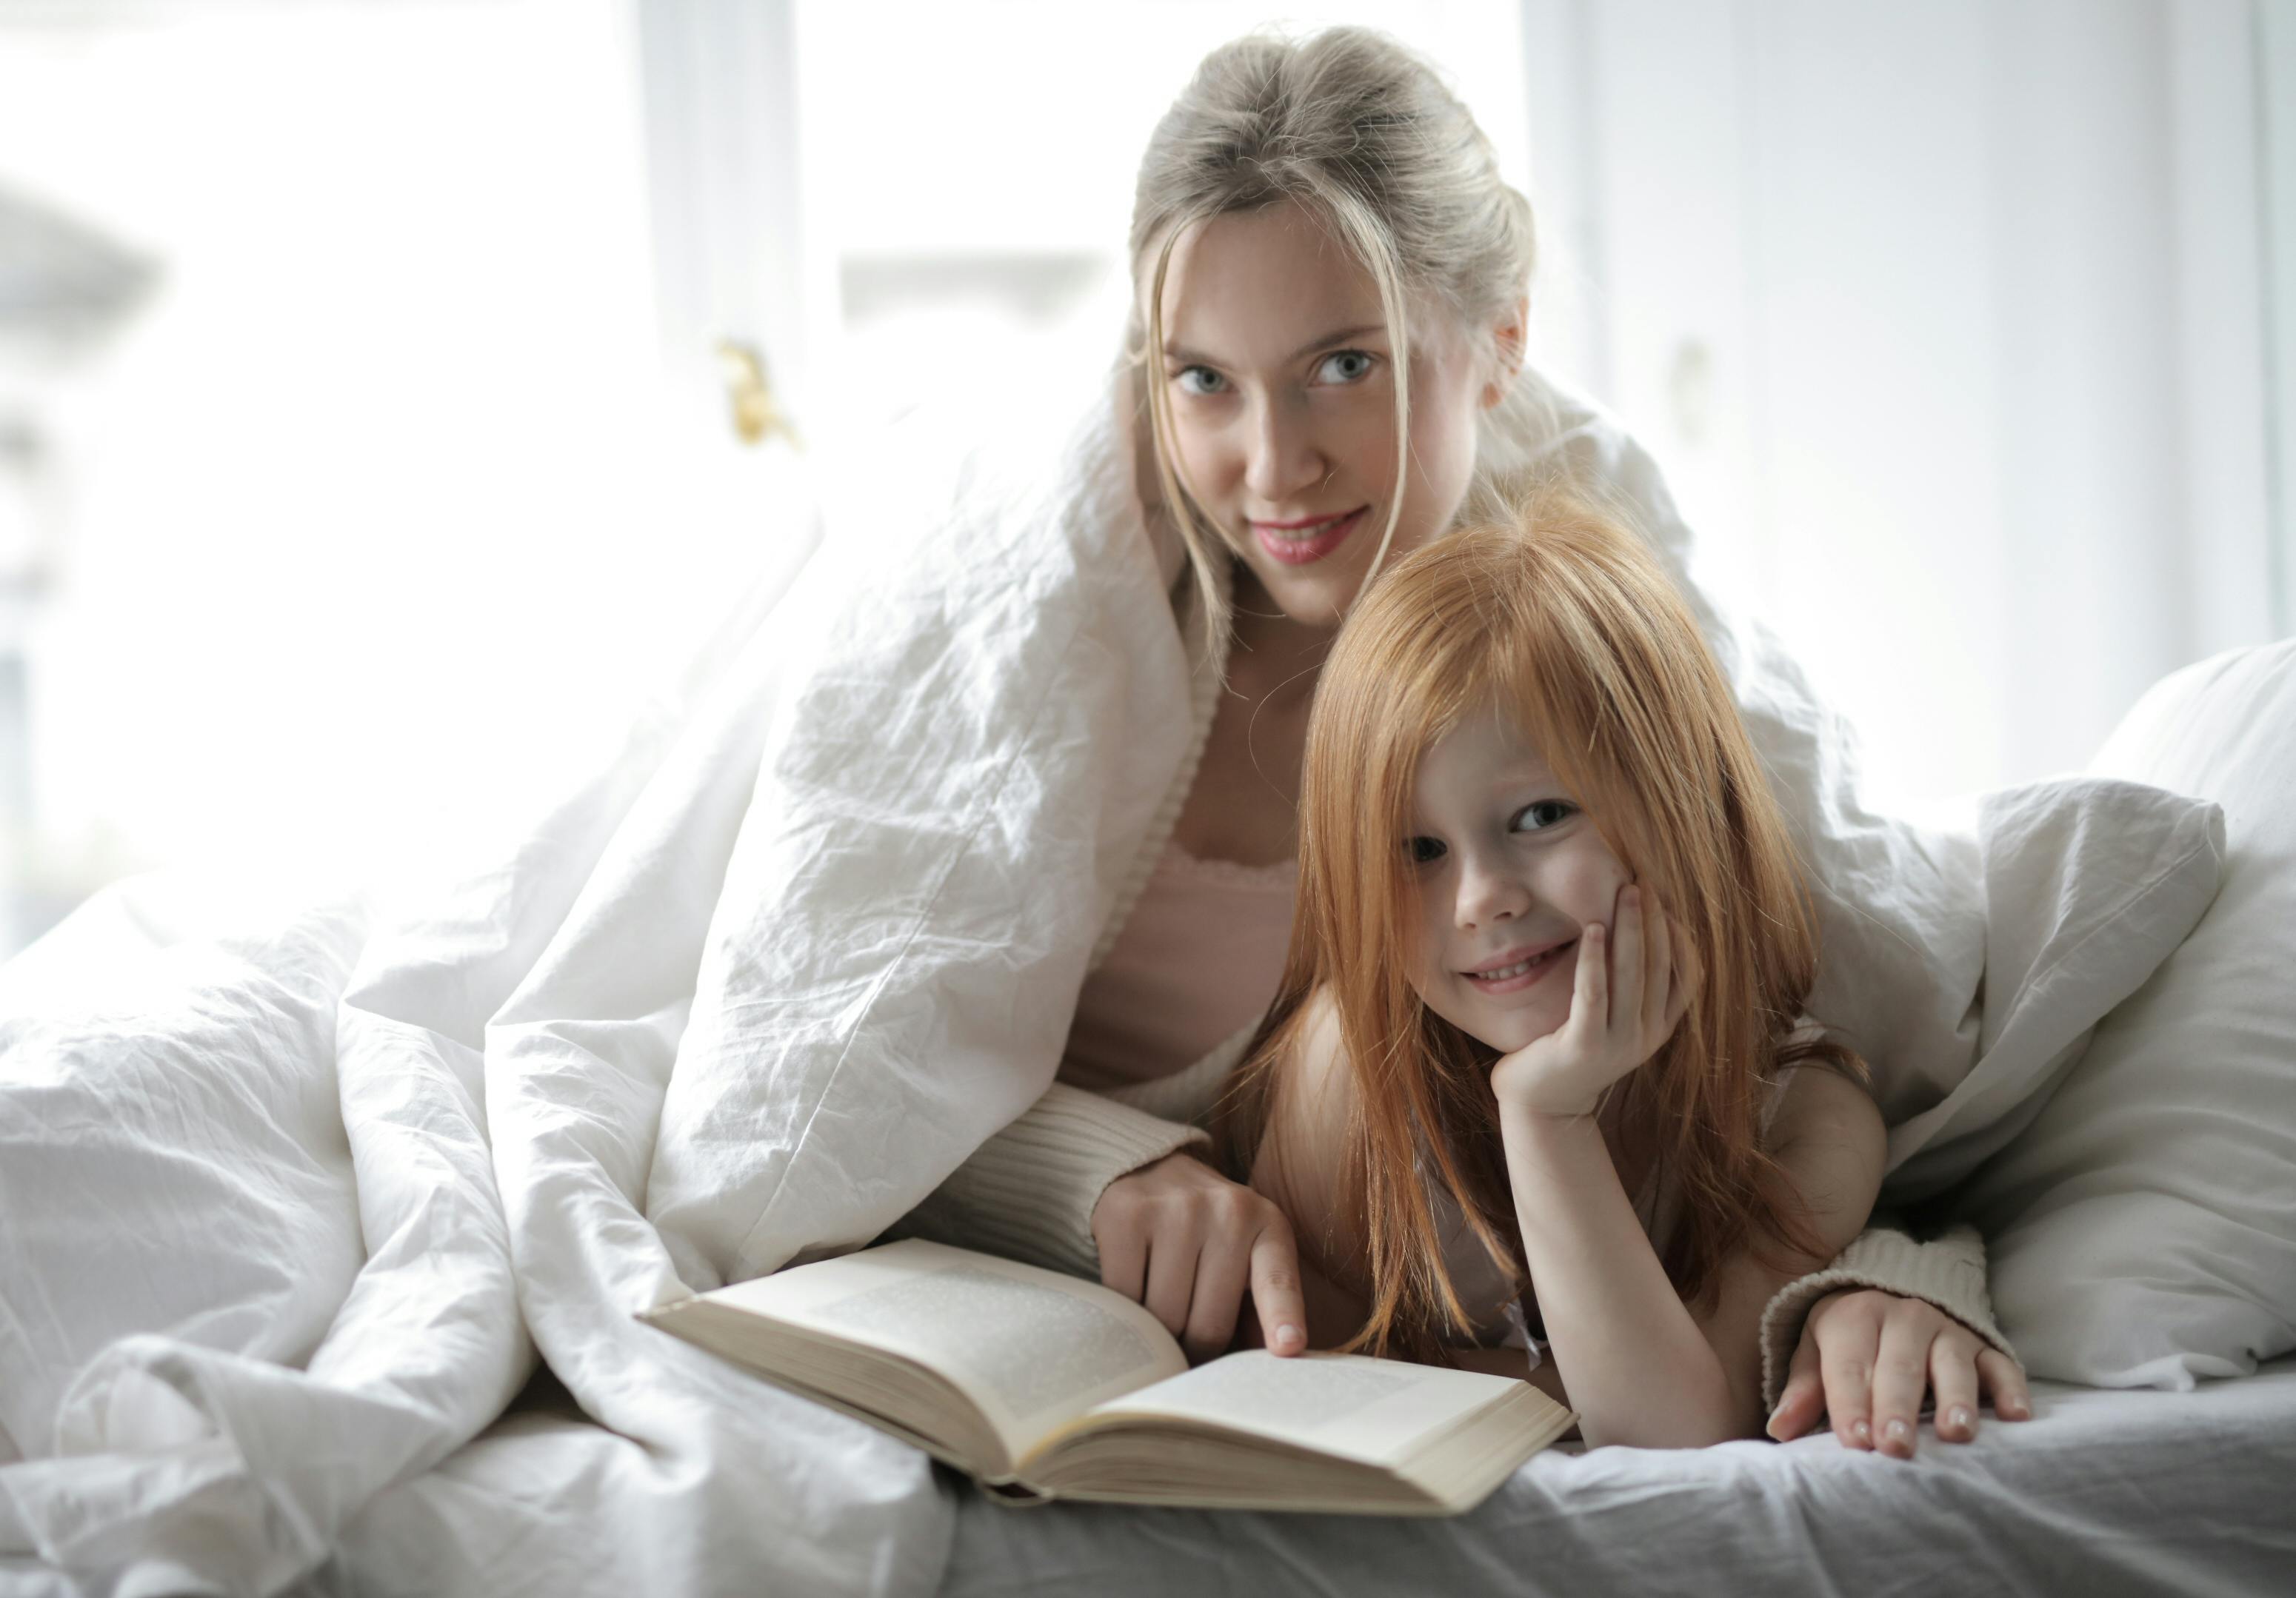 A mother and her daughter reading a book together | Source: Pexels